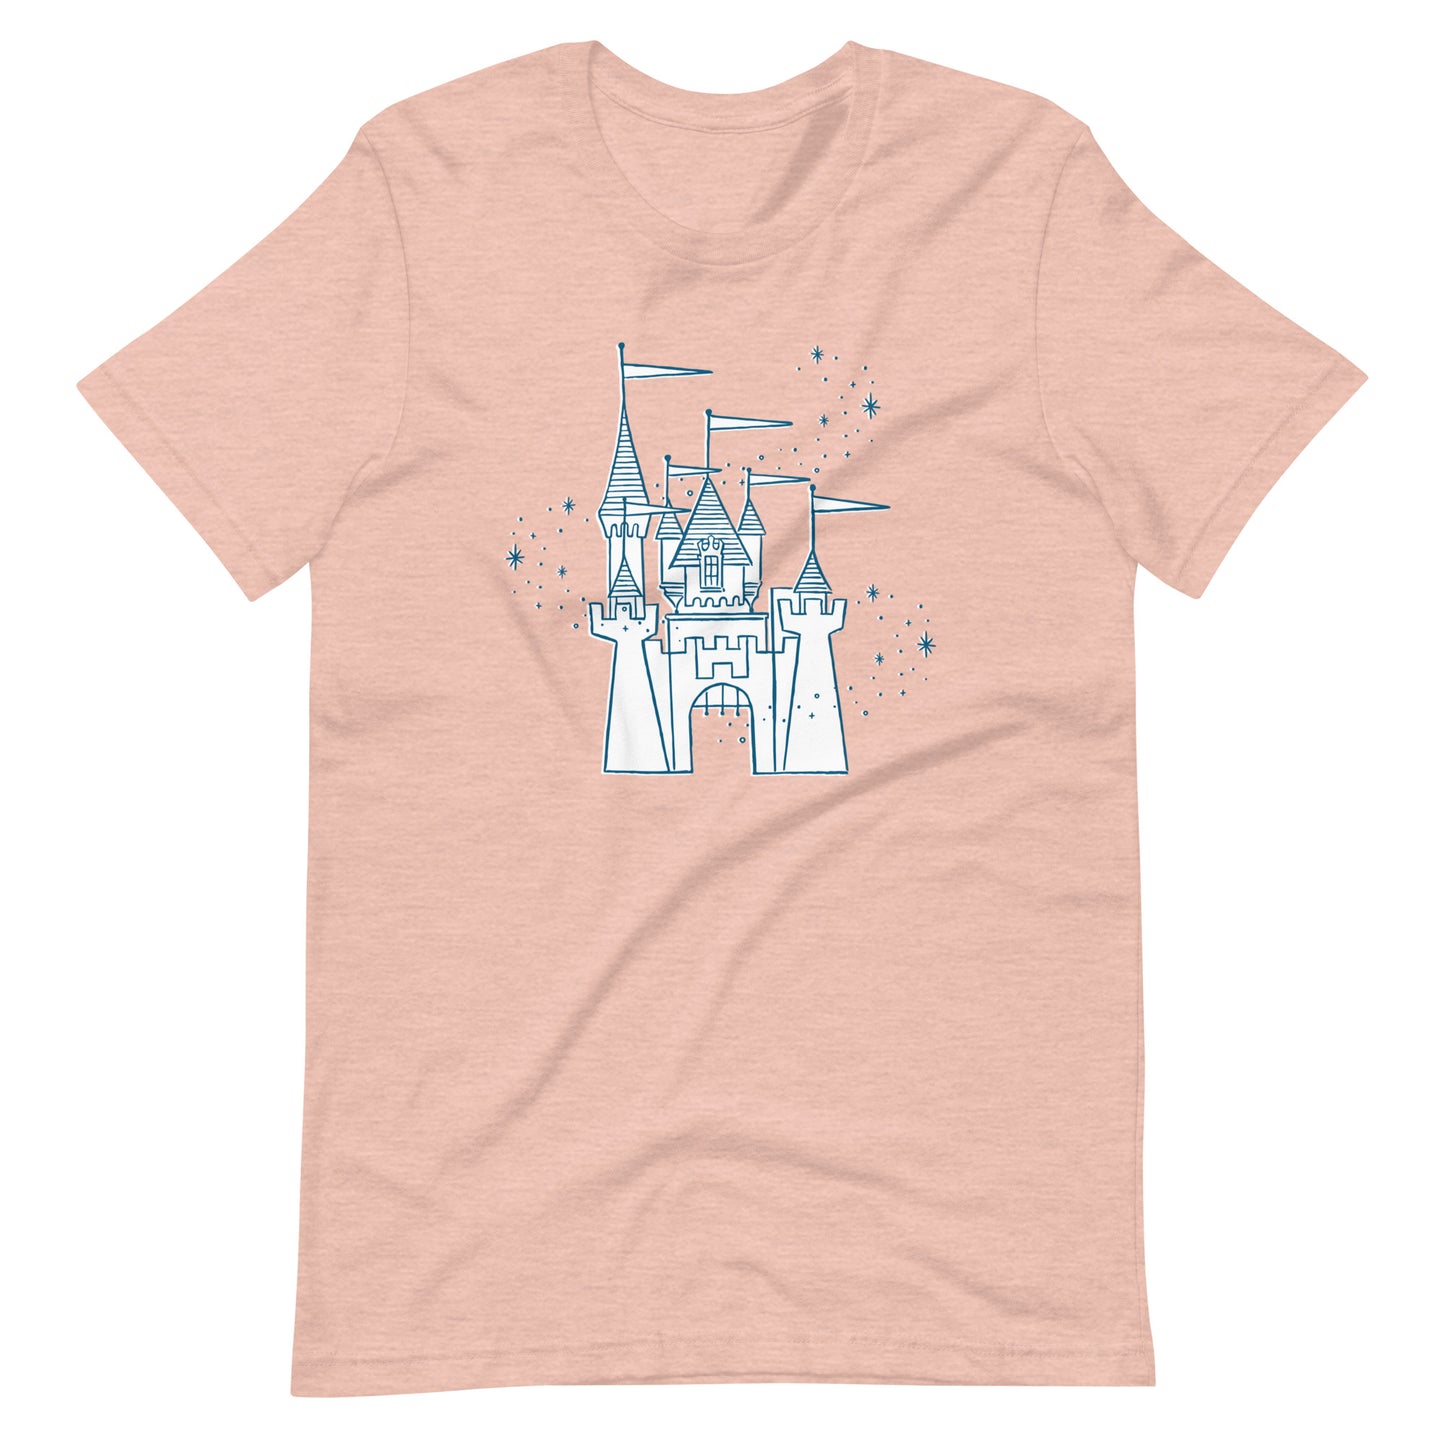 Peach shirt printed with vintage style sketch of the Disneyland Castle and pixie dust above the castle.